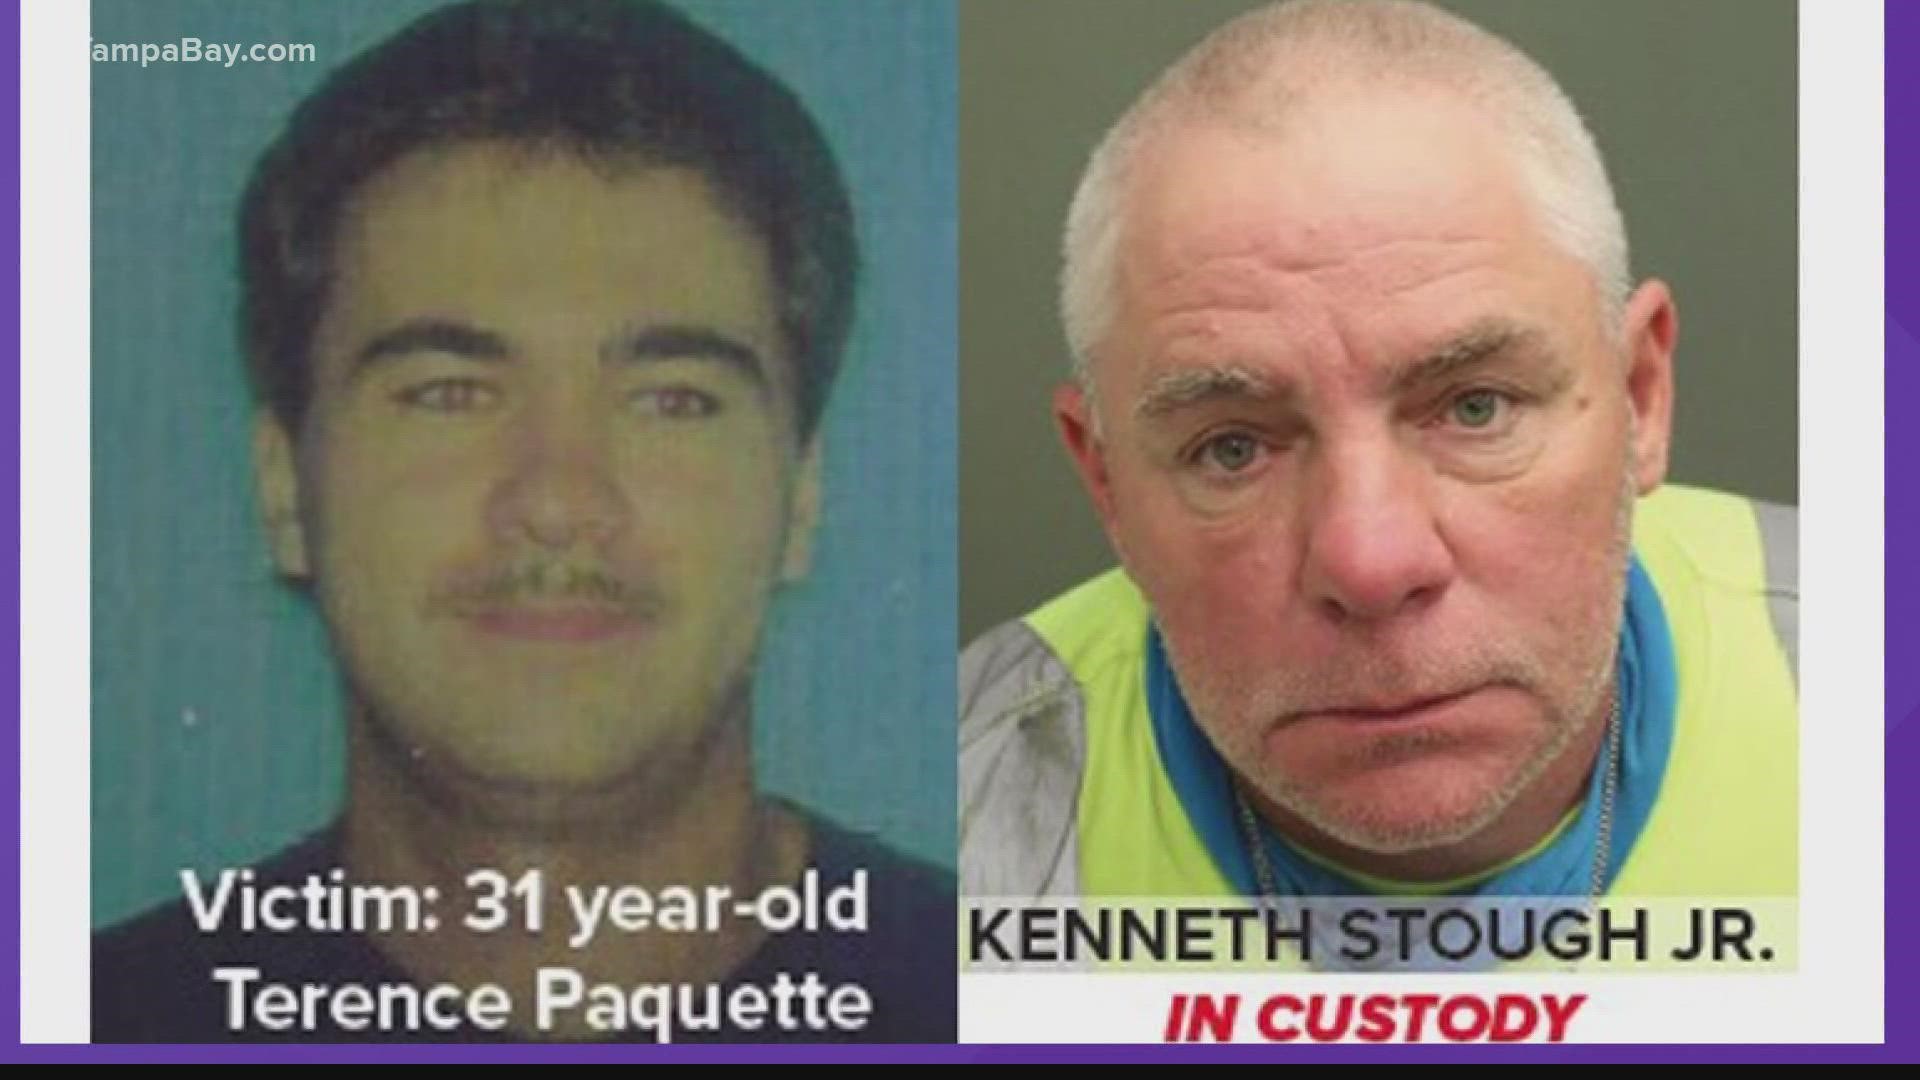 In 1996, Terence Paquette was brutally stabbed to death inside the Orange County convenience store where he worked.